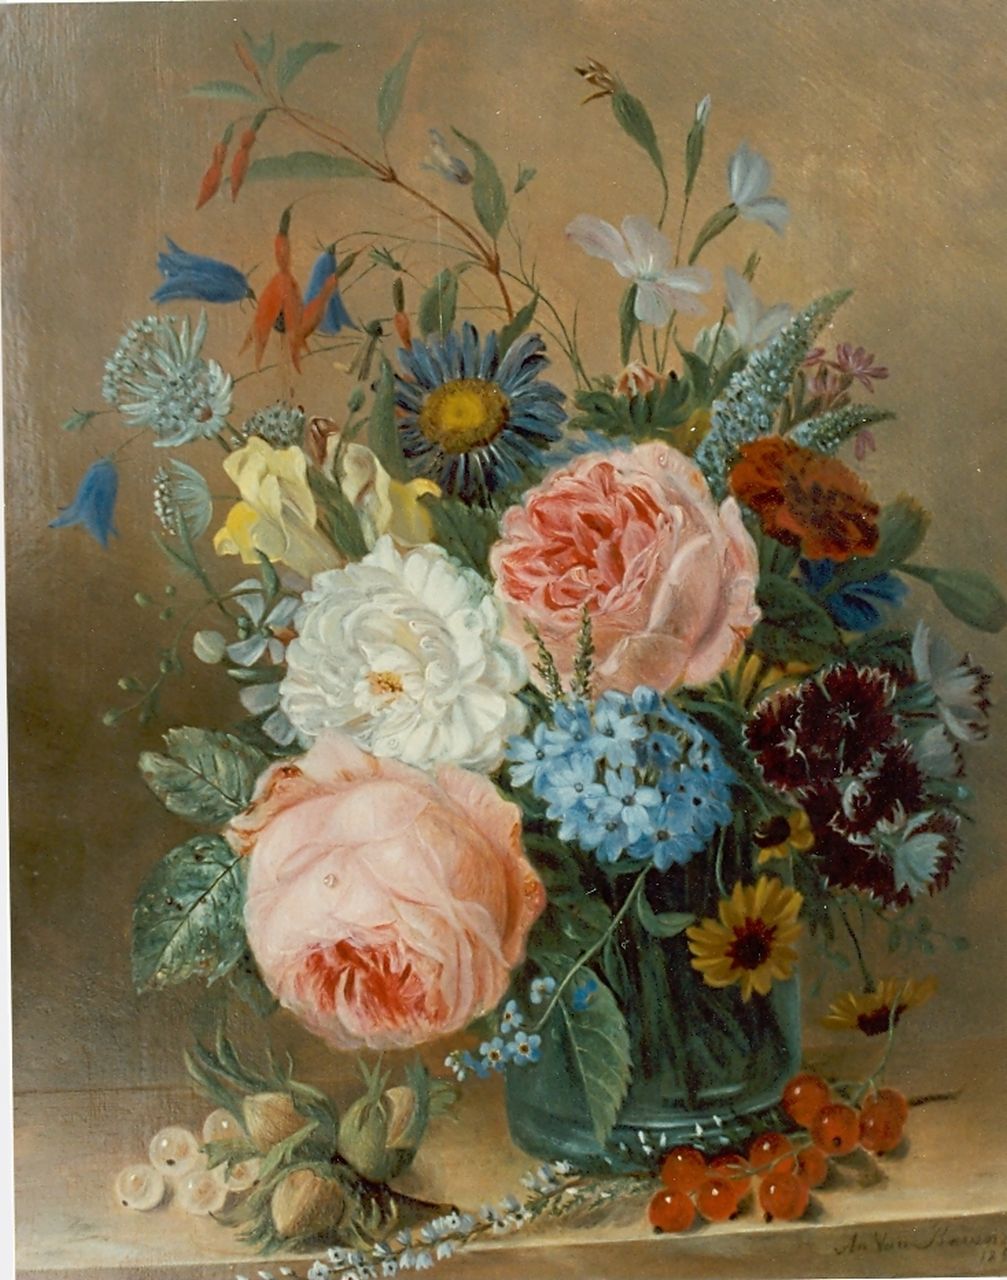 Ravenswaay A. van | Adriana van Ravenswaay, A flower still life, oil on panel 27.1 x 22.3 cm, signed l.r. and dated 1850